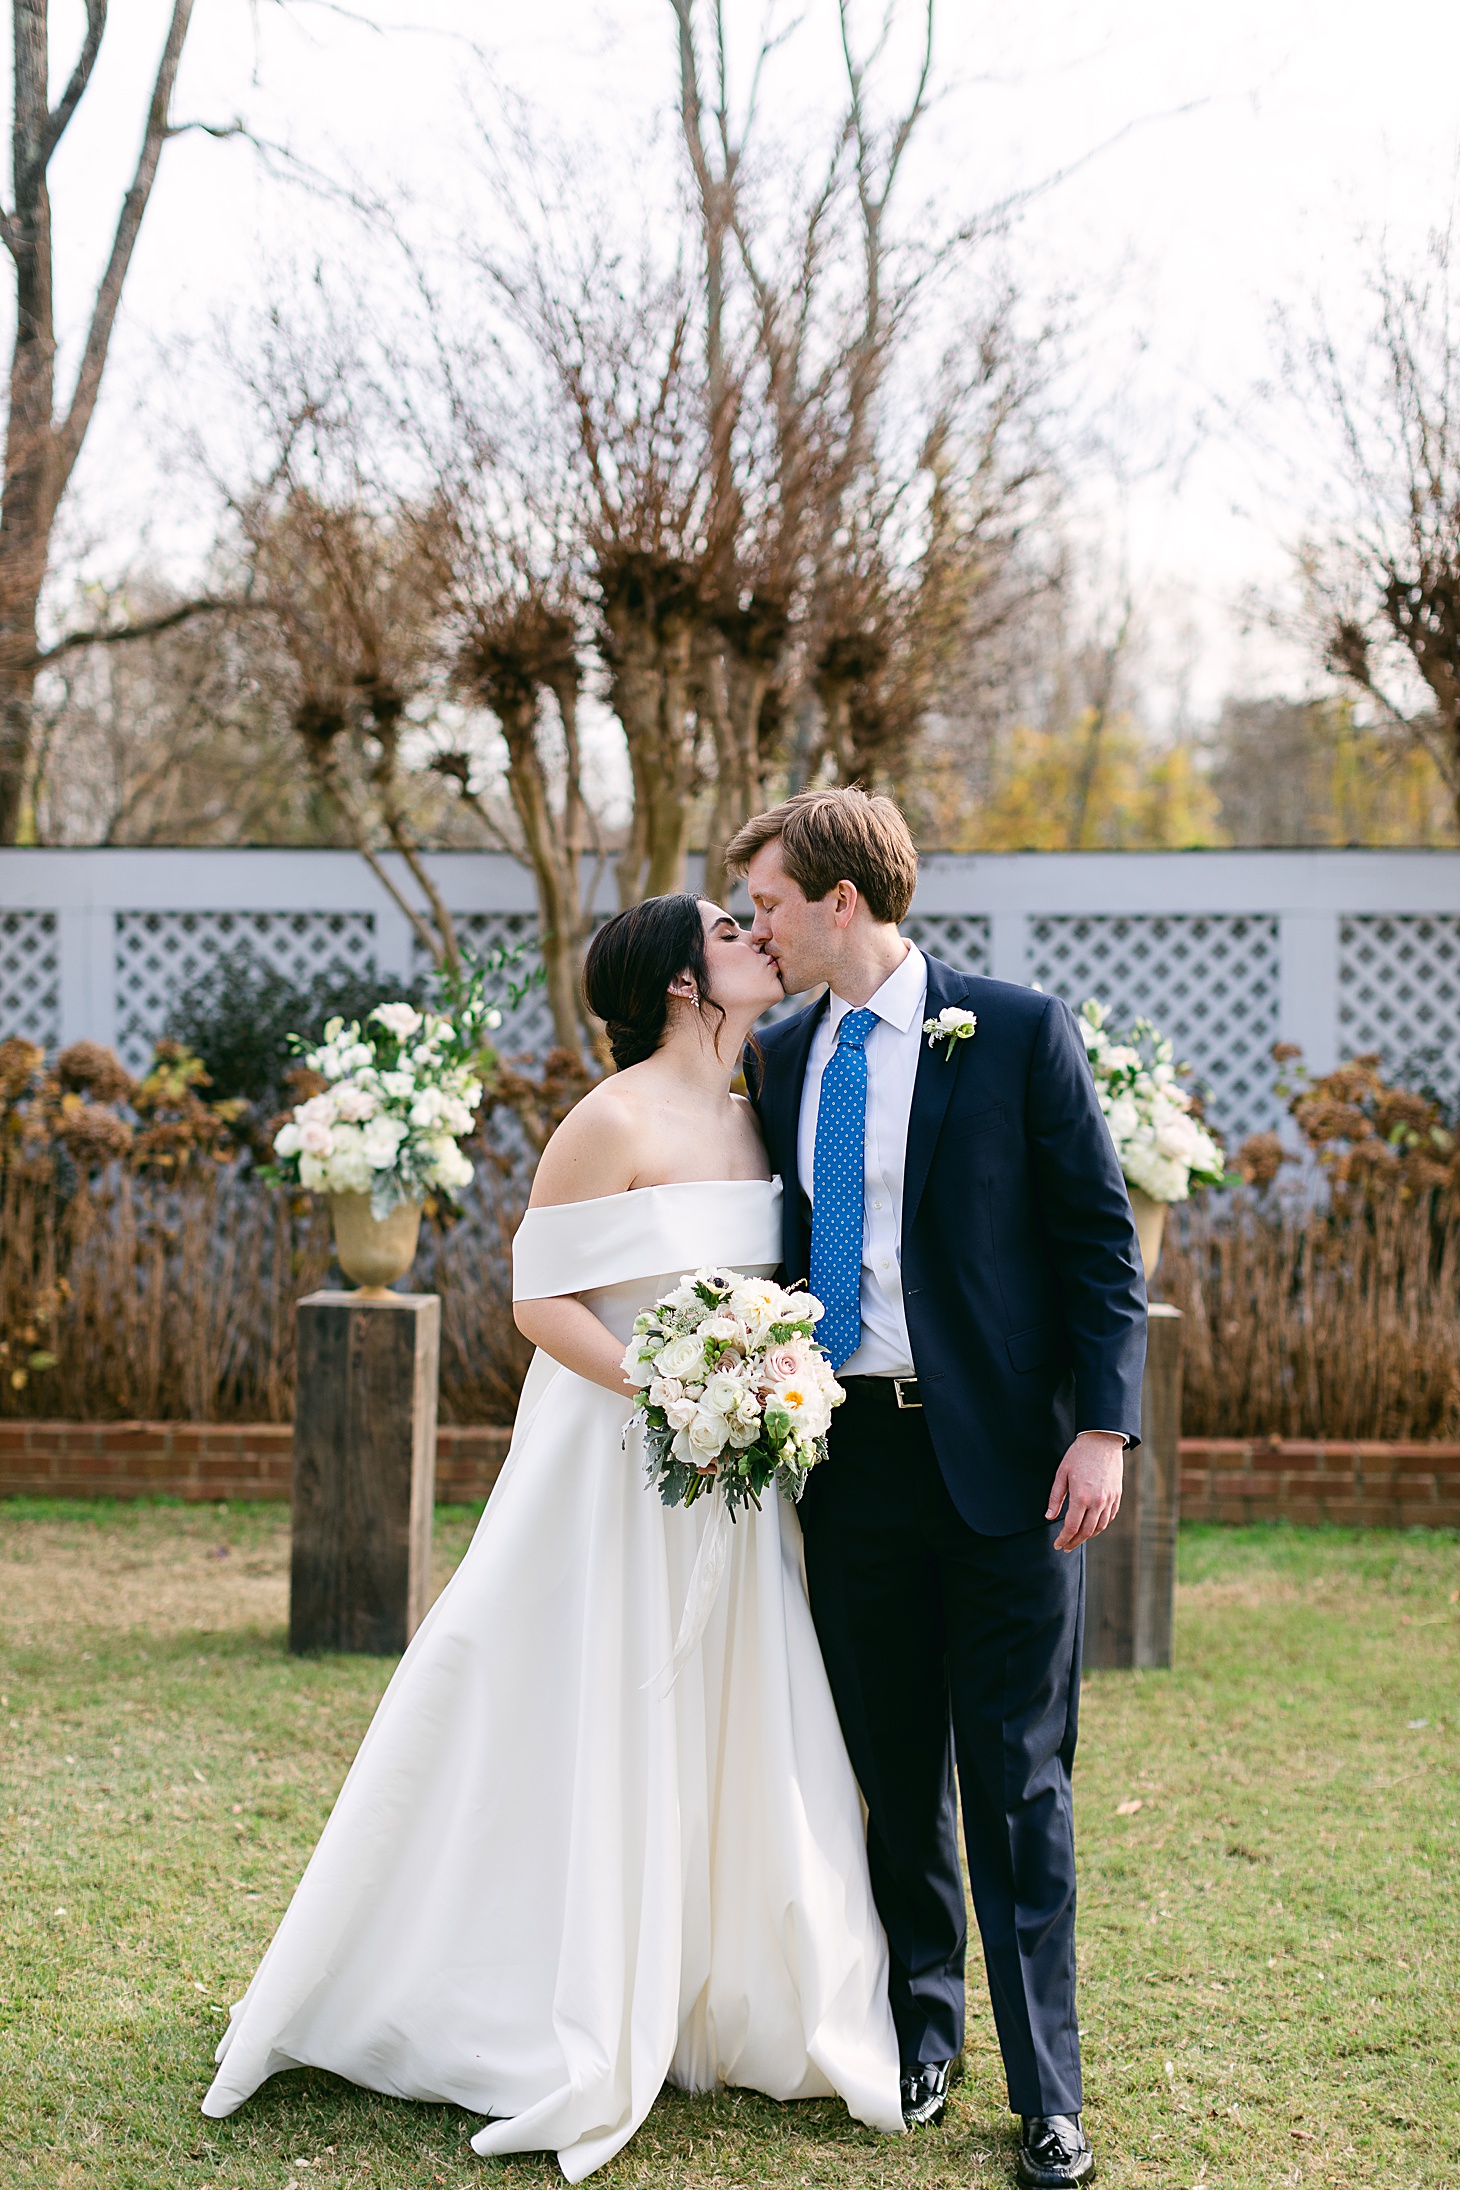 Just married at wedding at The Clifton Charlottesville by Sarah Bradshaw Photography